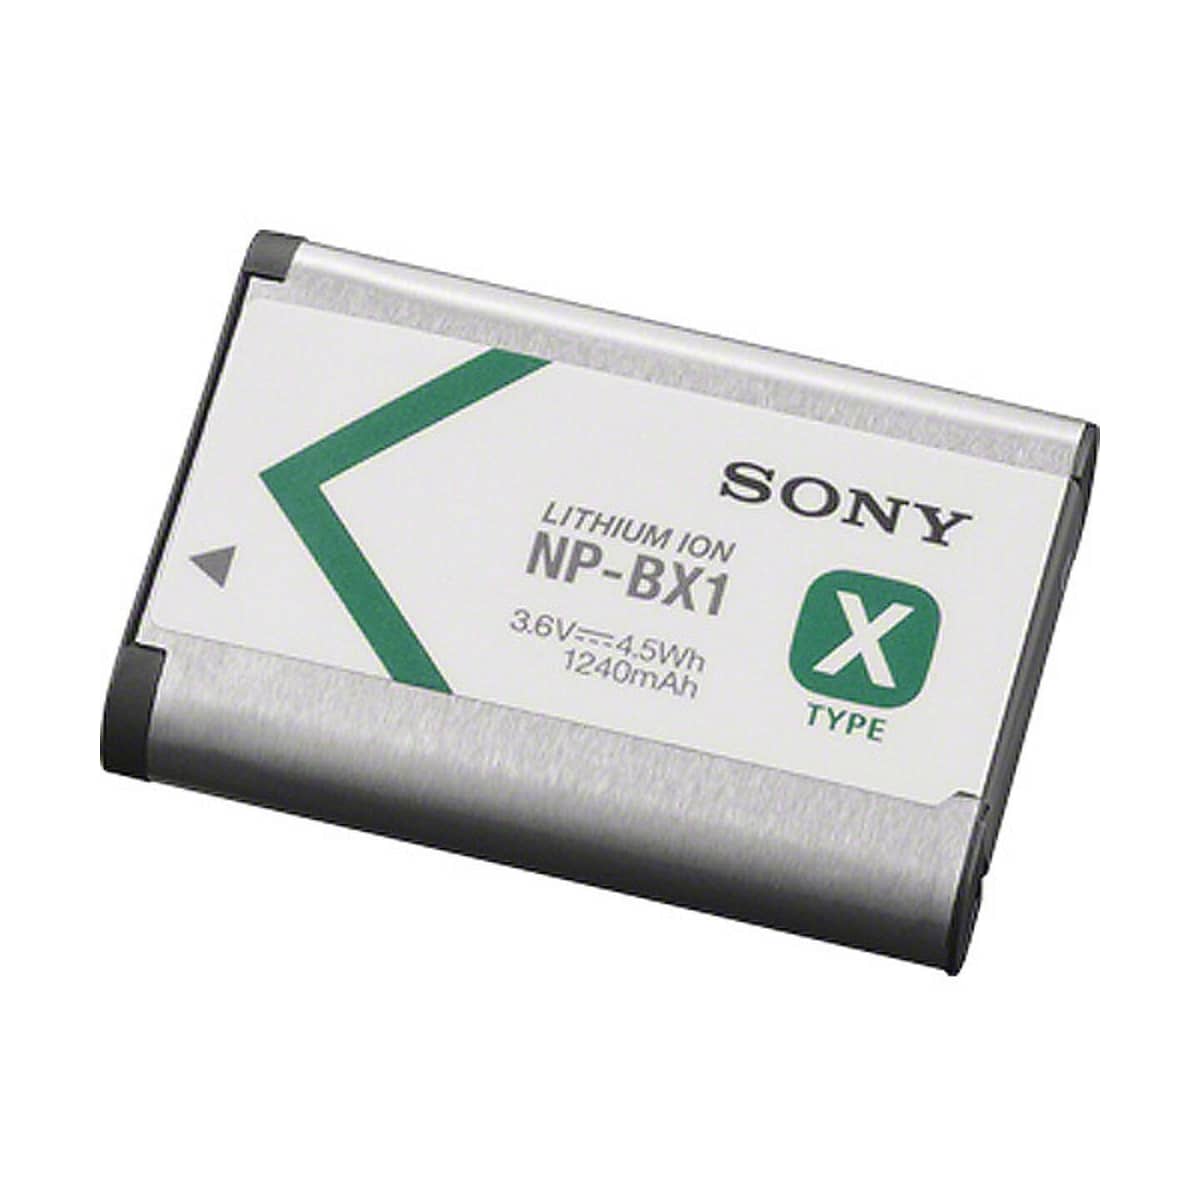 sony_np_bx1__01